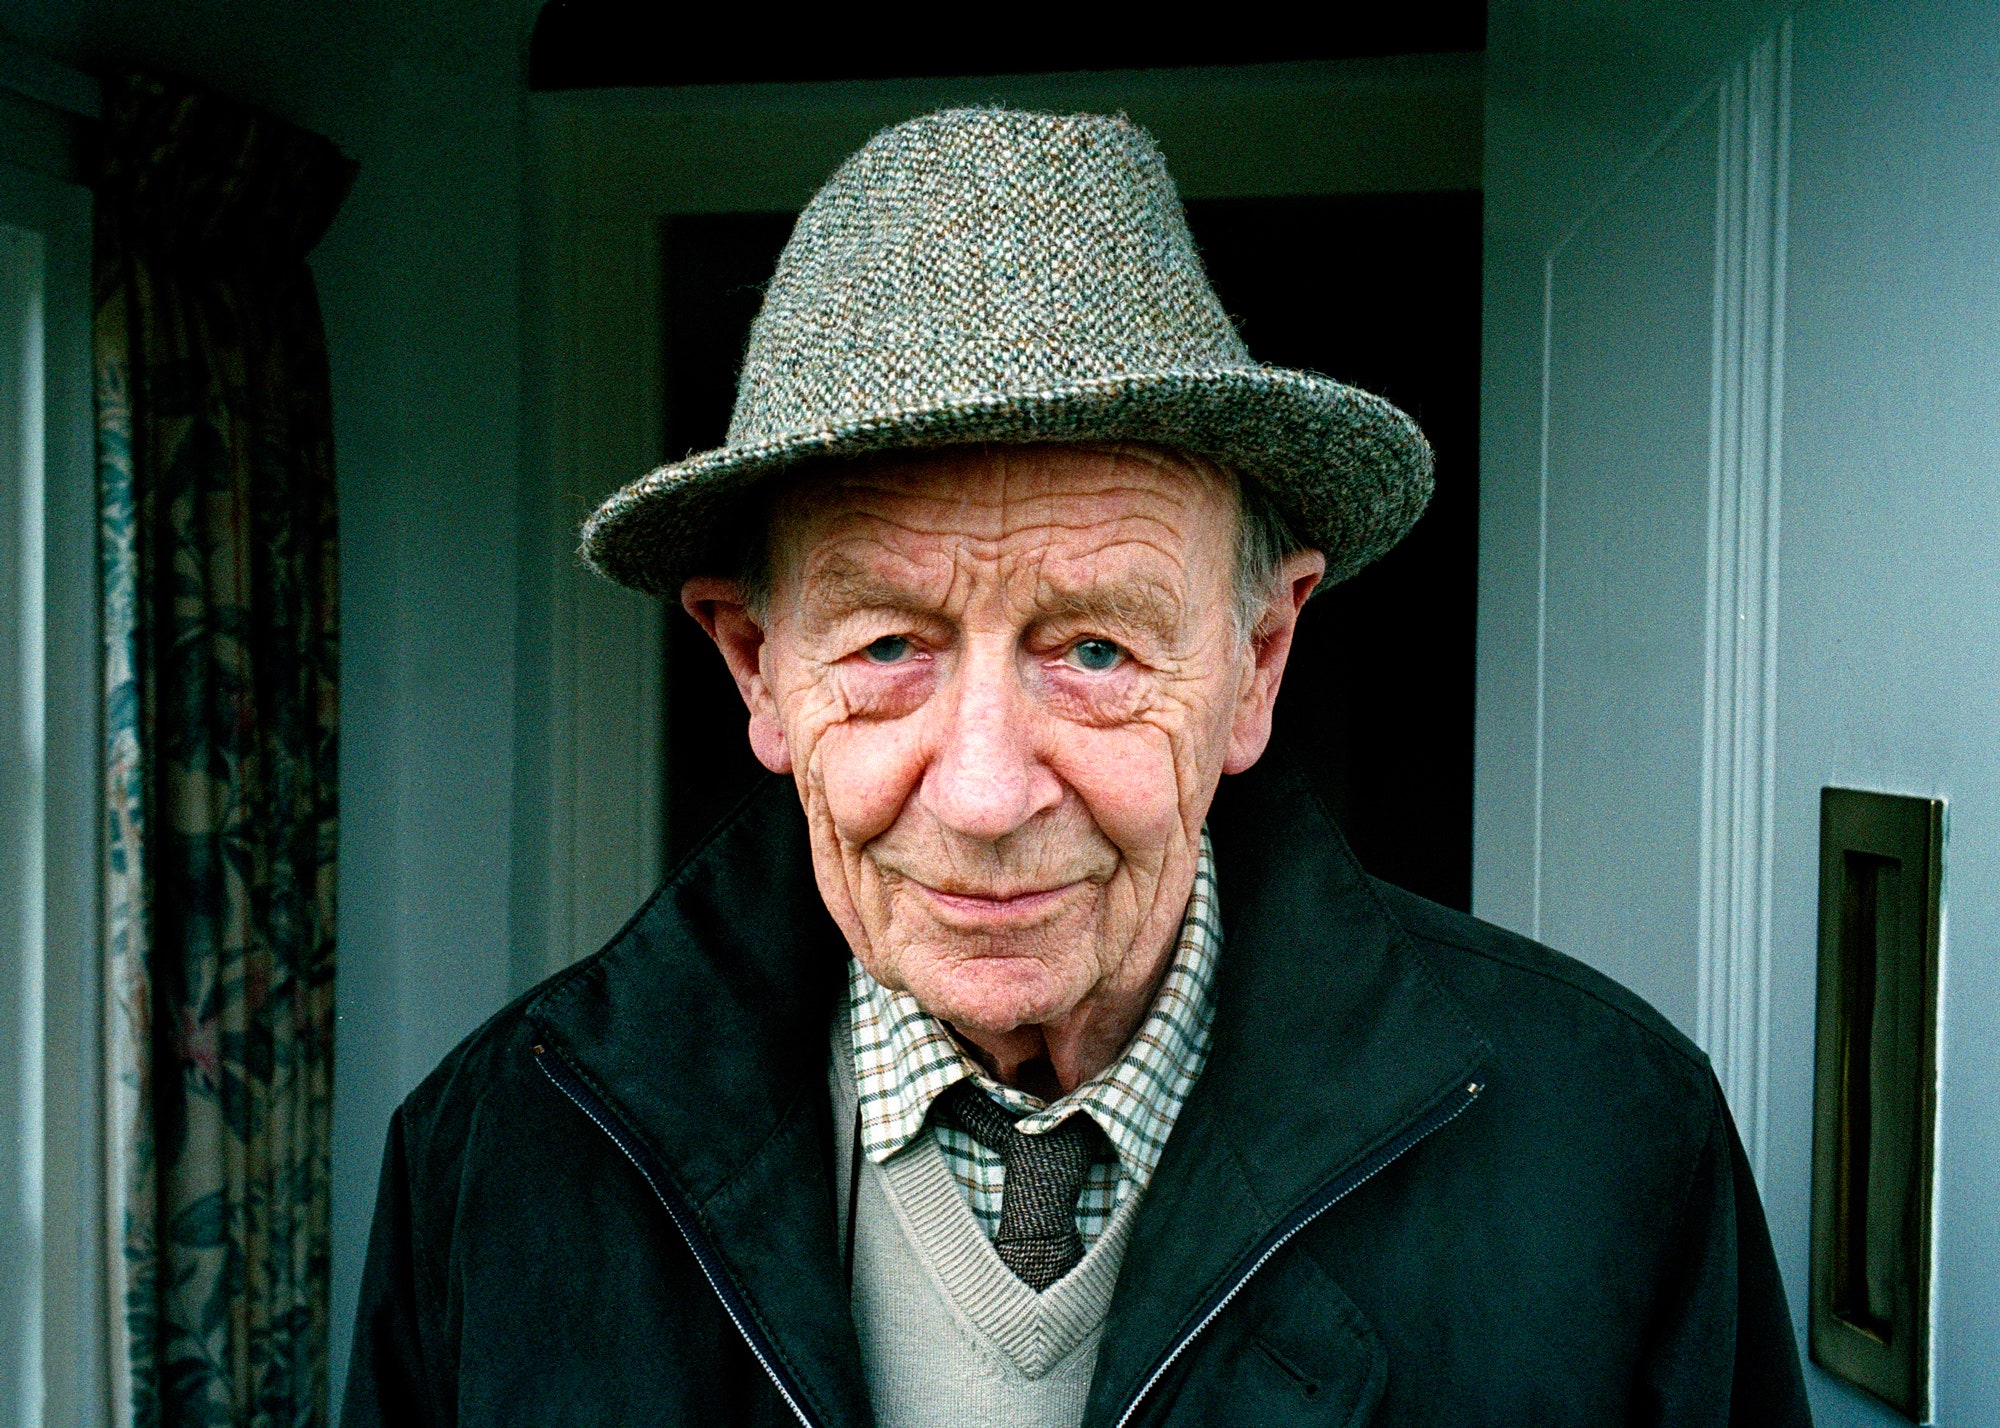 “They were as good as we were”: the stories of William Trevor